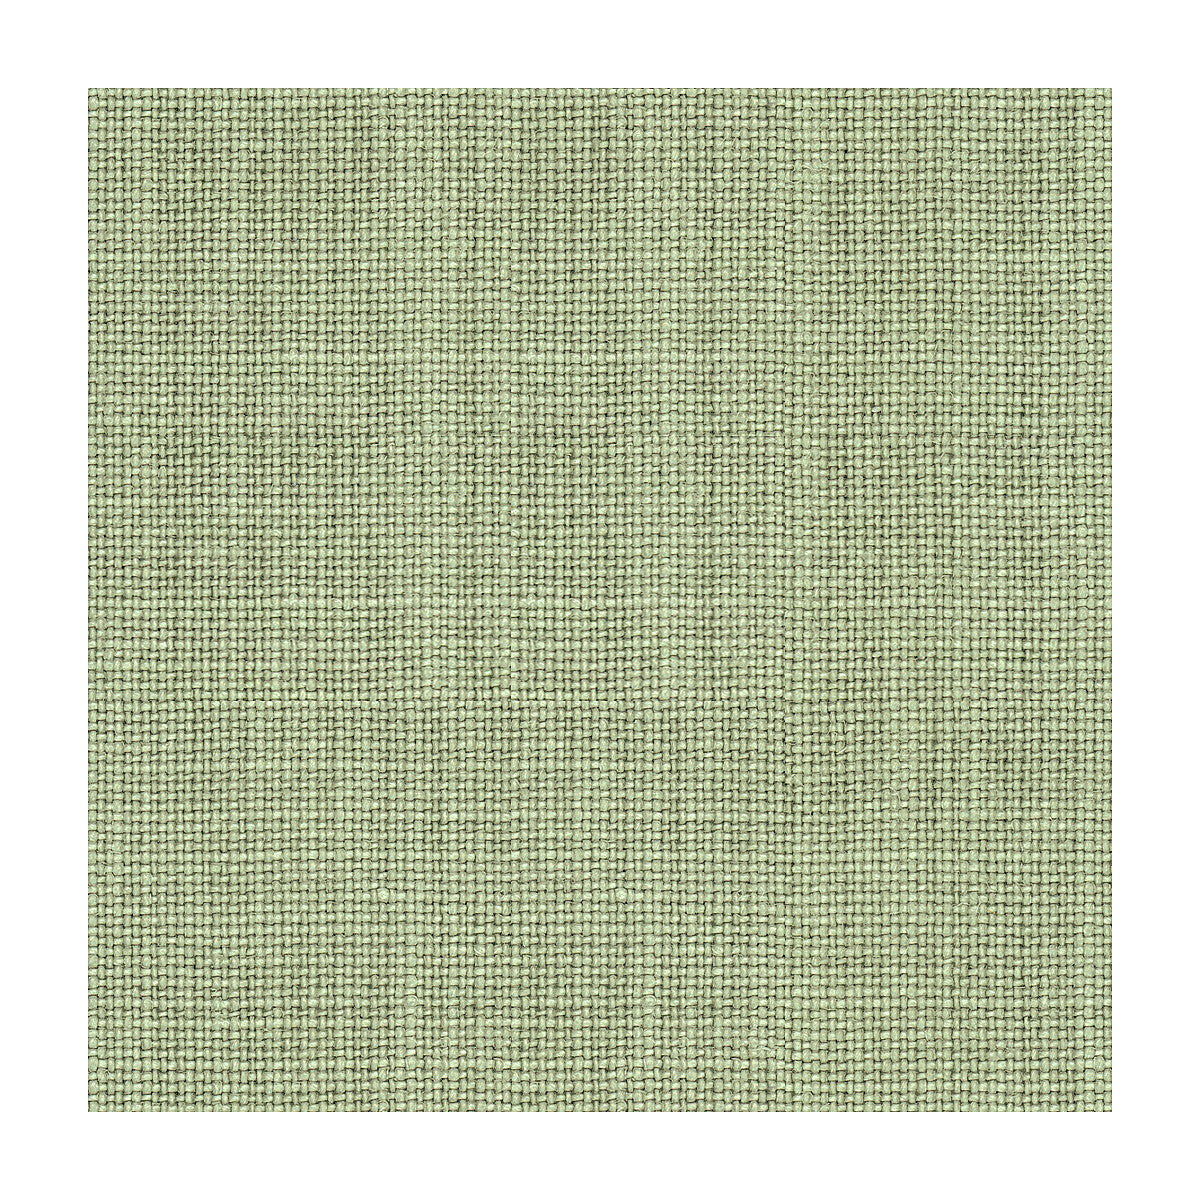 Kravet Basics fabric in 33767-15 color - pattern 33767.15.0 - by Kravet Basics in the Perfect Plains collection